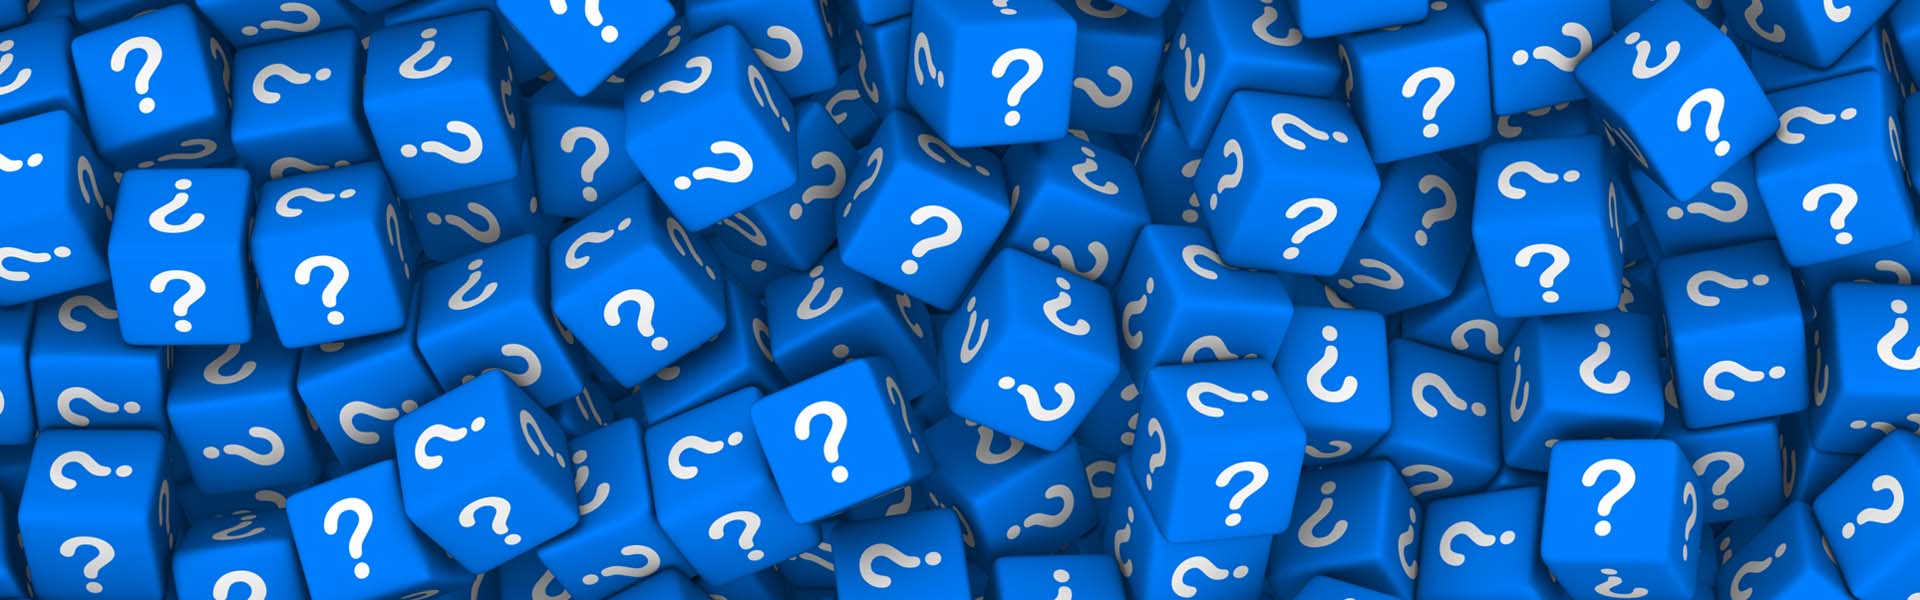 Heap of blue dices with question marks.